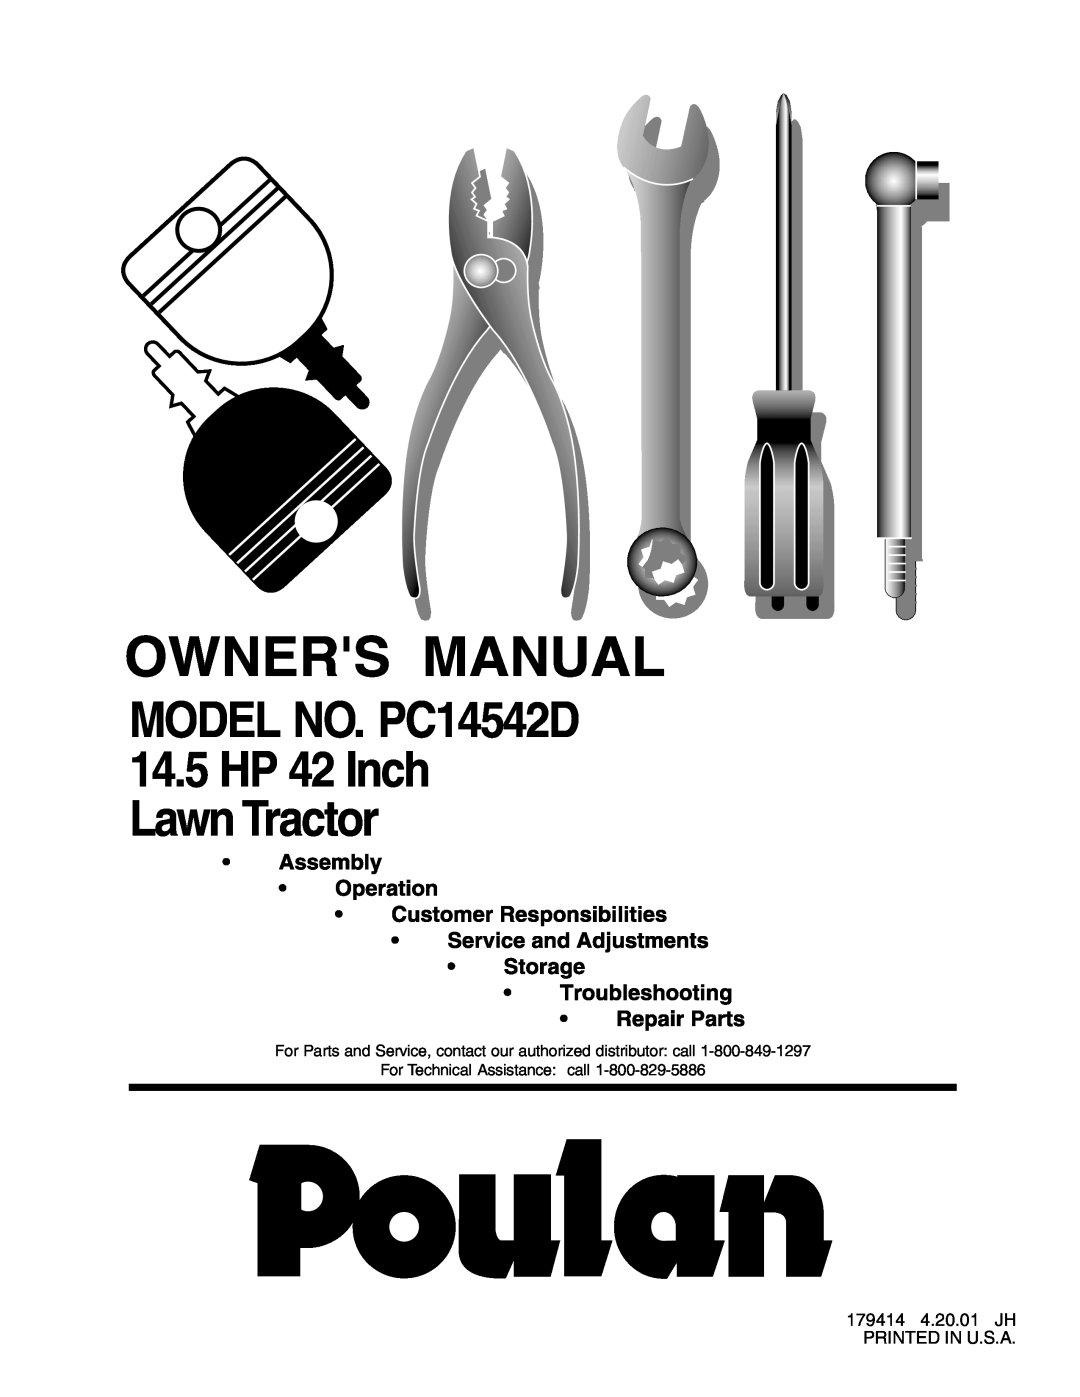 Poulan owner manual MODEL NO. PC14542D 14.5HP 42 Inch Lawn Tractor 